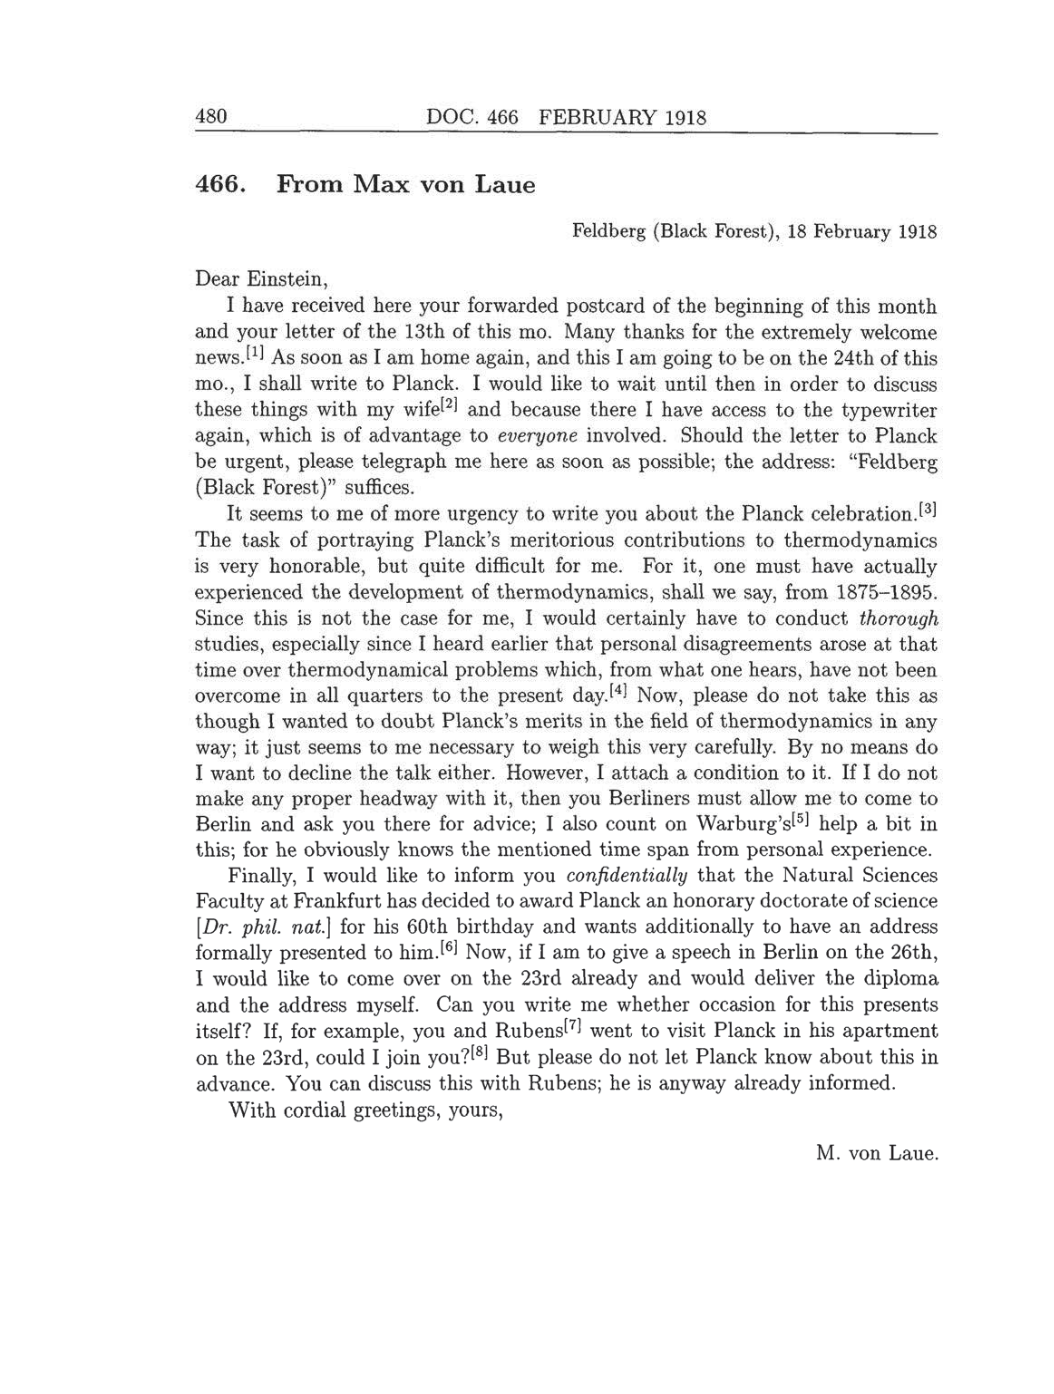 Volume 8: The Berlin Years: Correspondence, 1914-1918 (English translation supplement) page 480